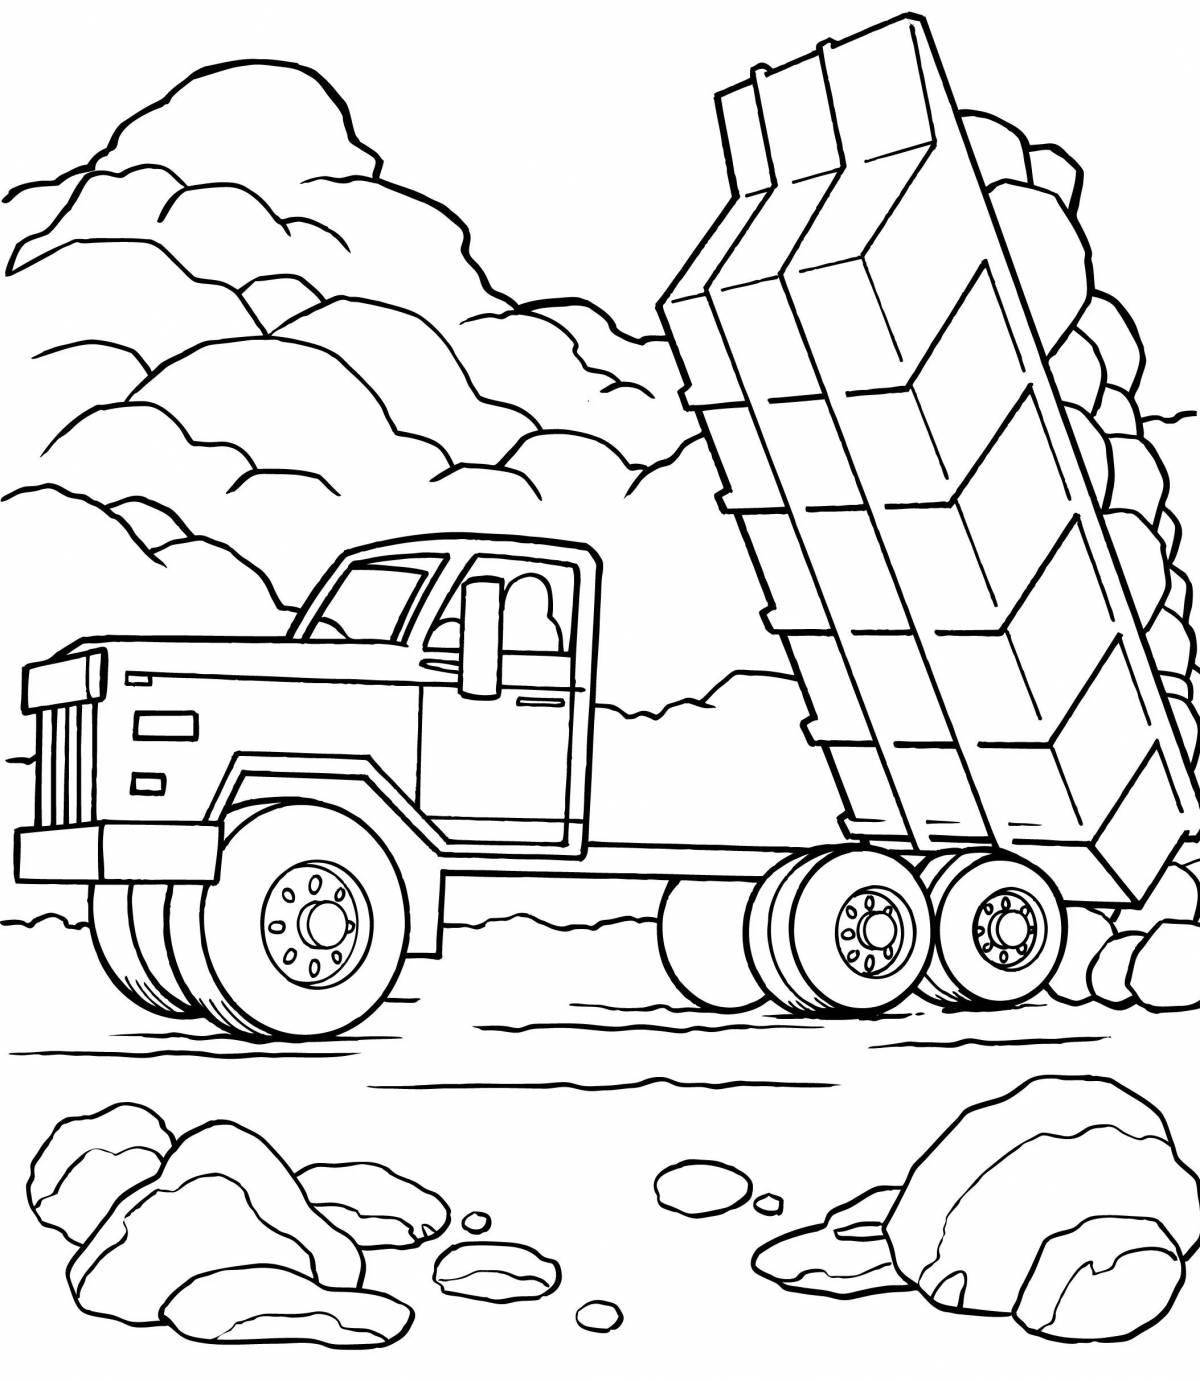 Shiny trucks coloring page